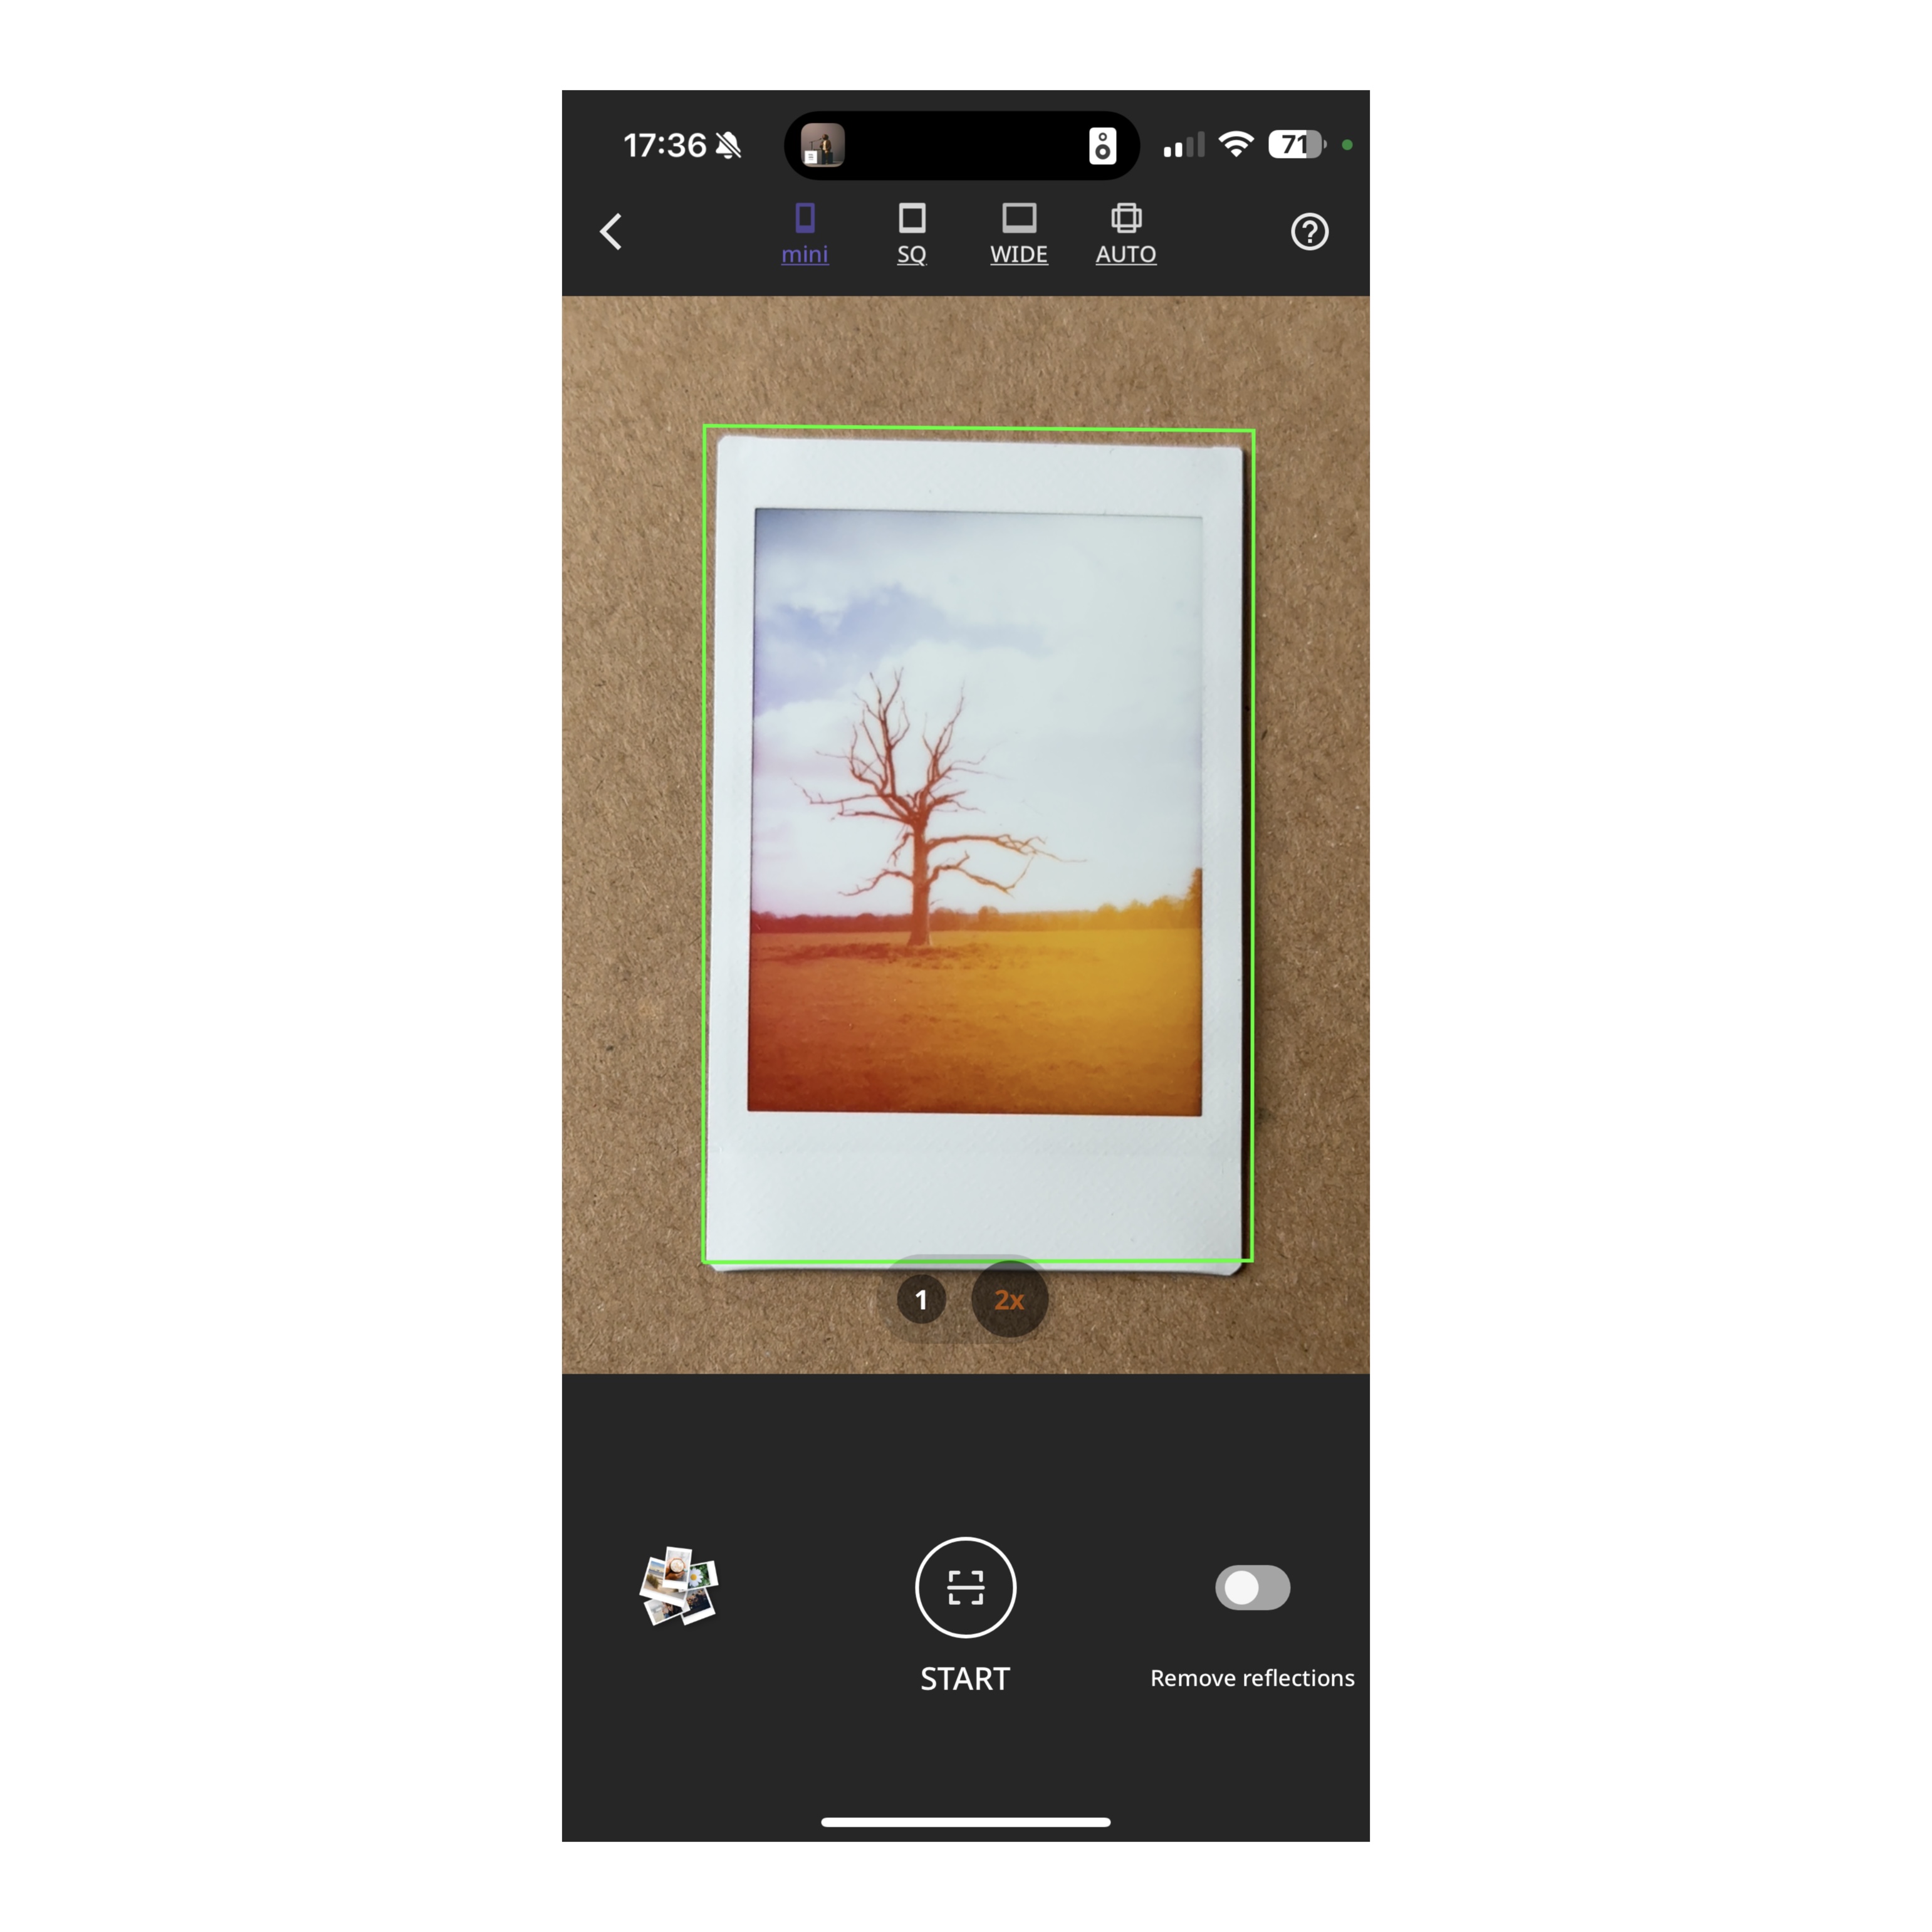 Fujifilm Instax UpI app screenshot illustrating how it crops and digitizes your instant print